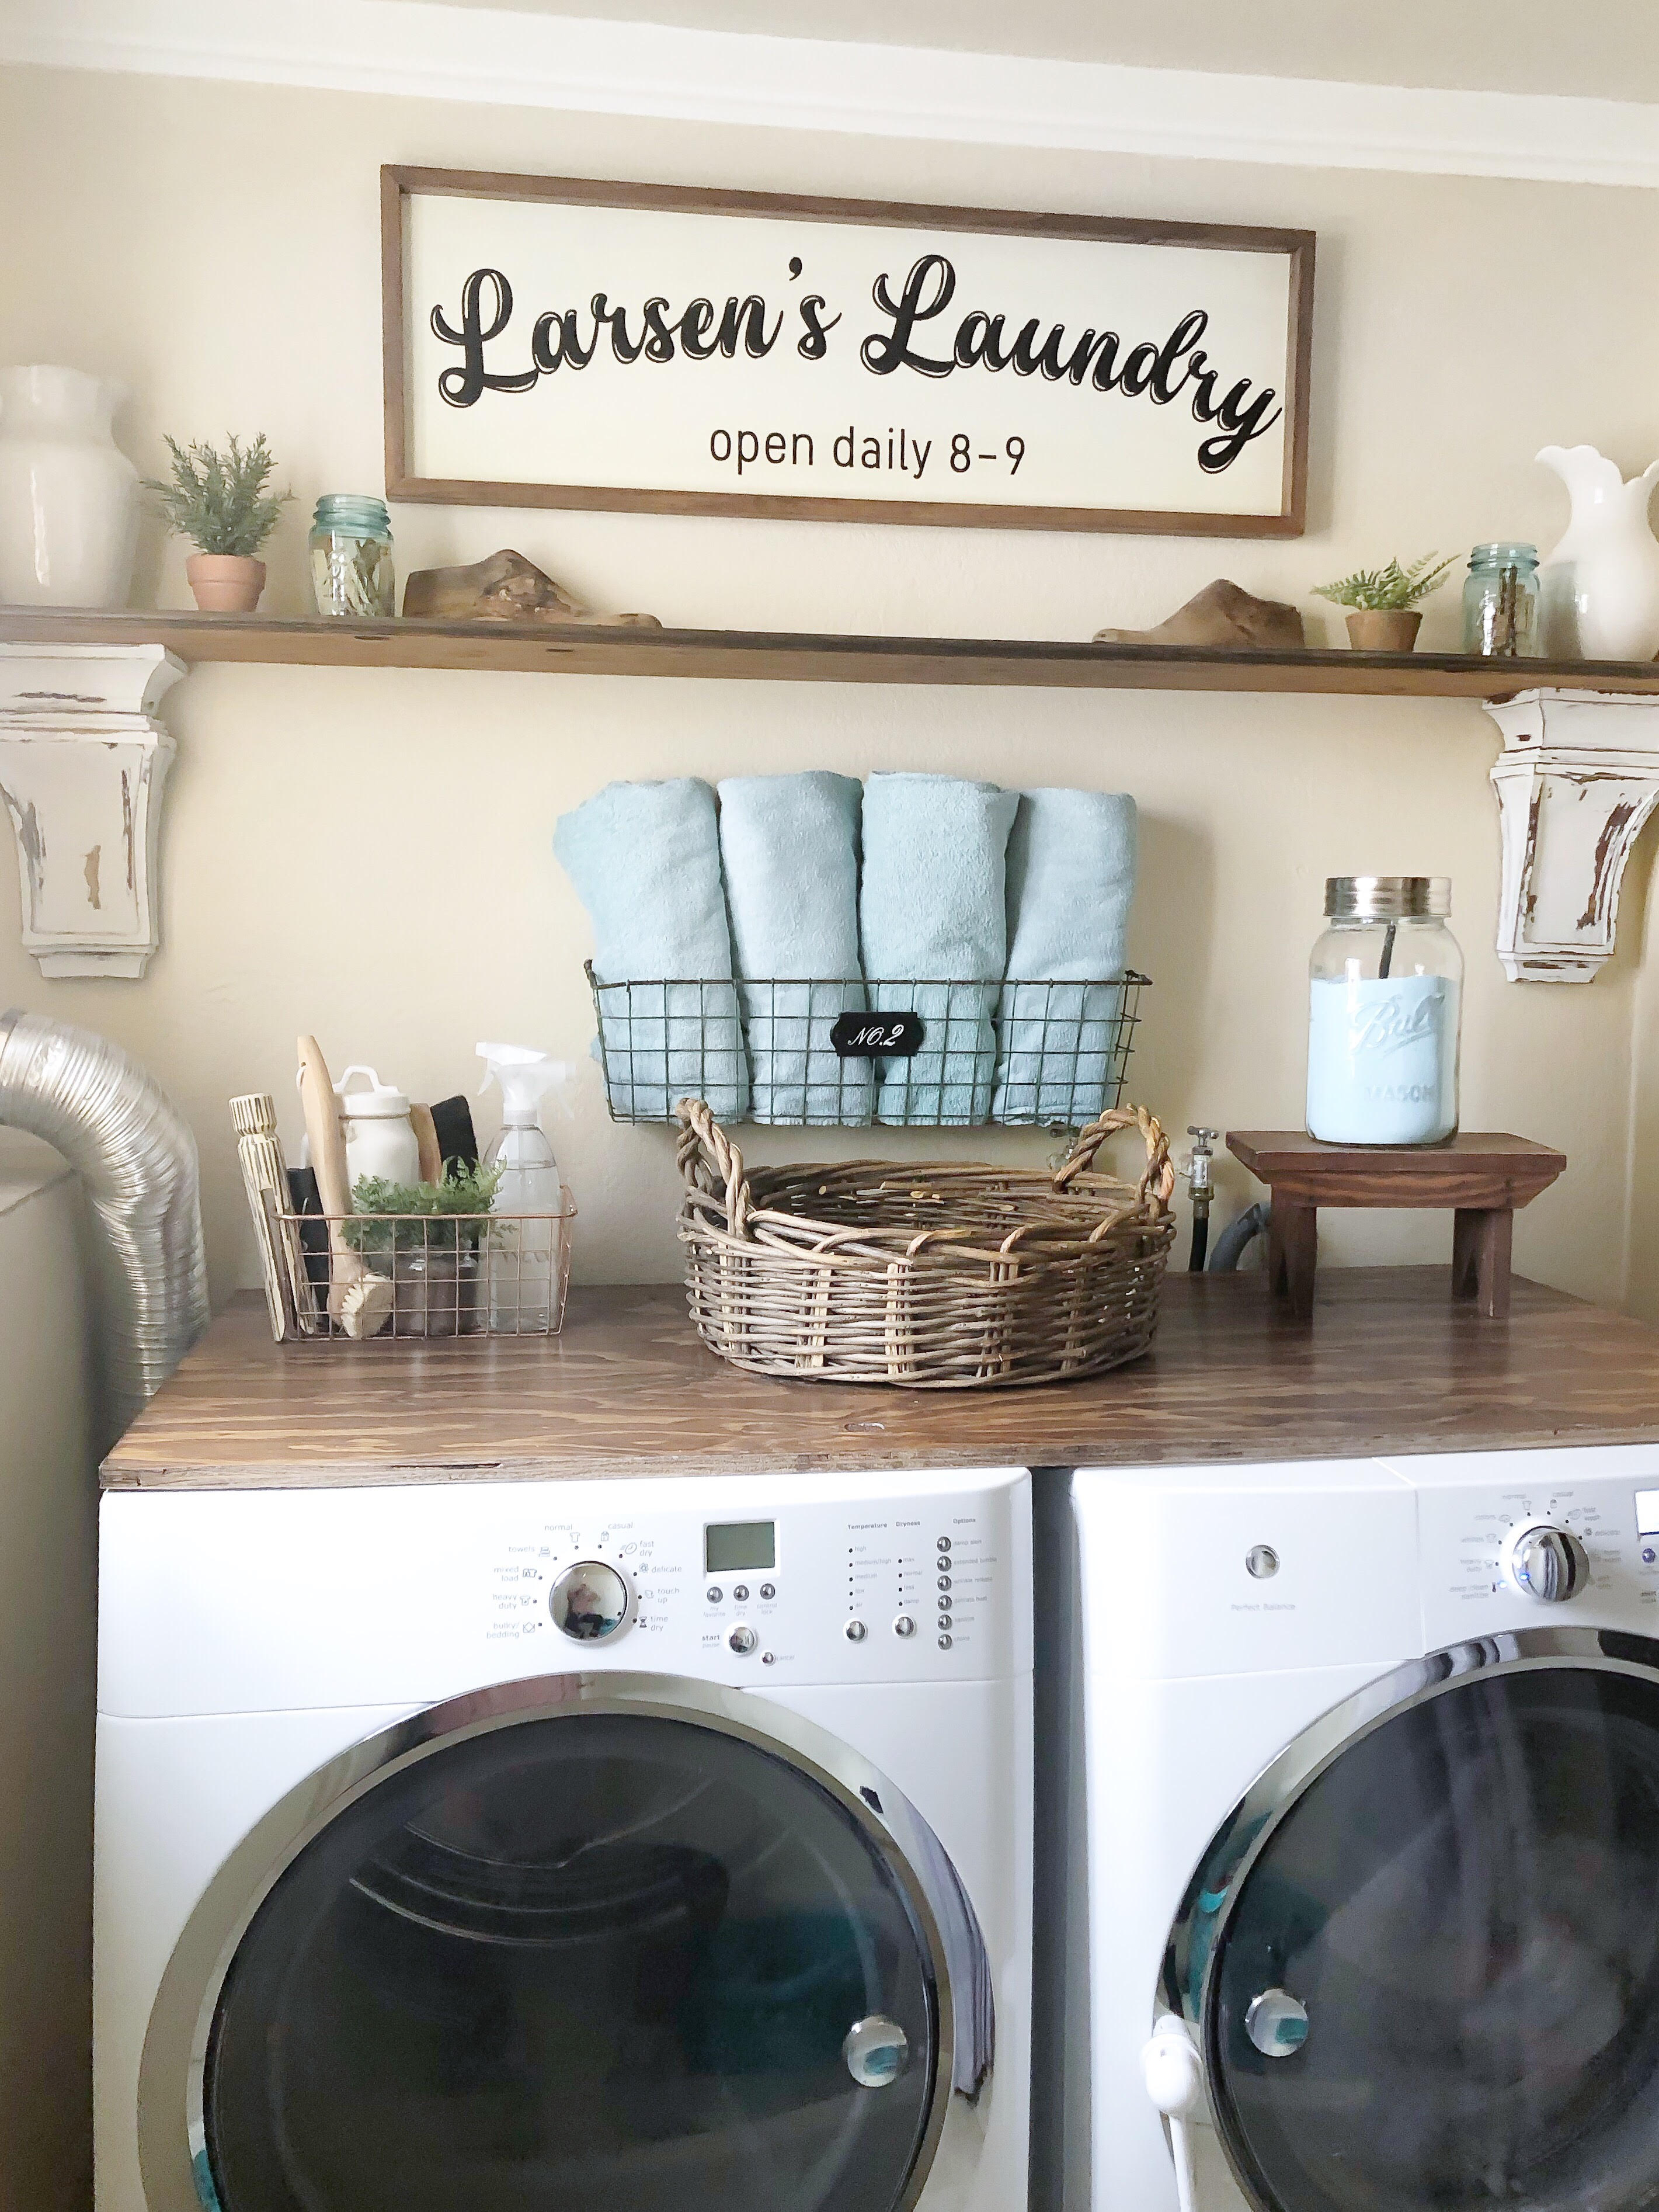 Laundry Room Decor and Helpful Tips - 700 N COTTAGE